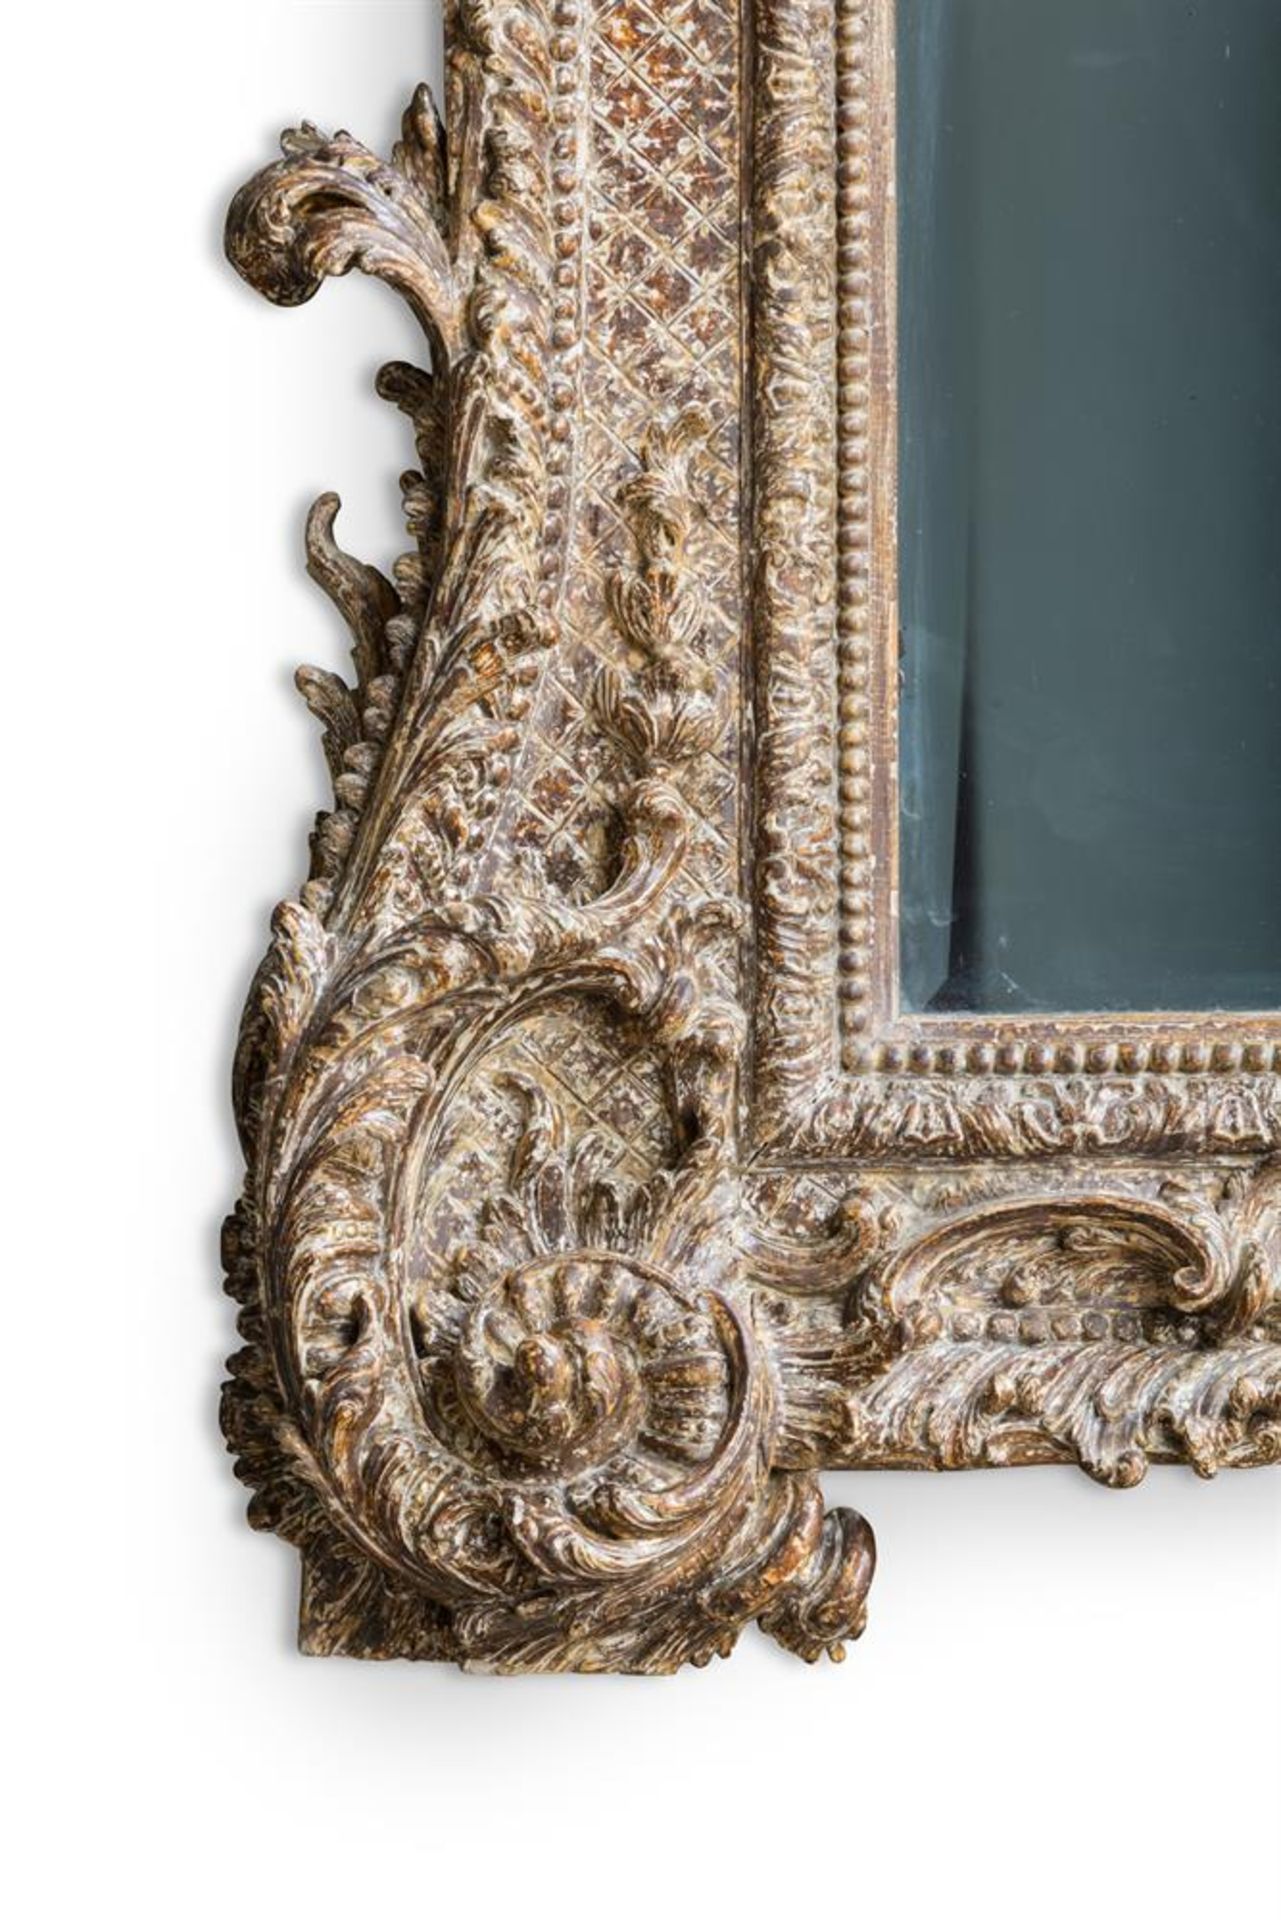 A CARVED GILTWOOD MIRROR 18TH CENTURY AND LATER - Image 11 of 13